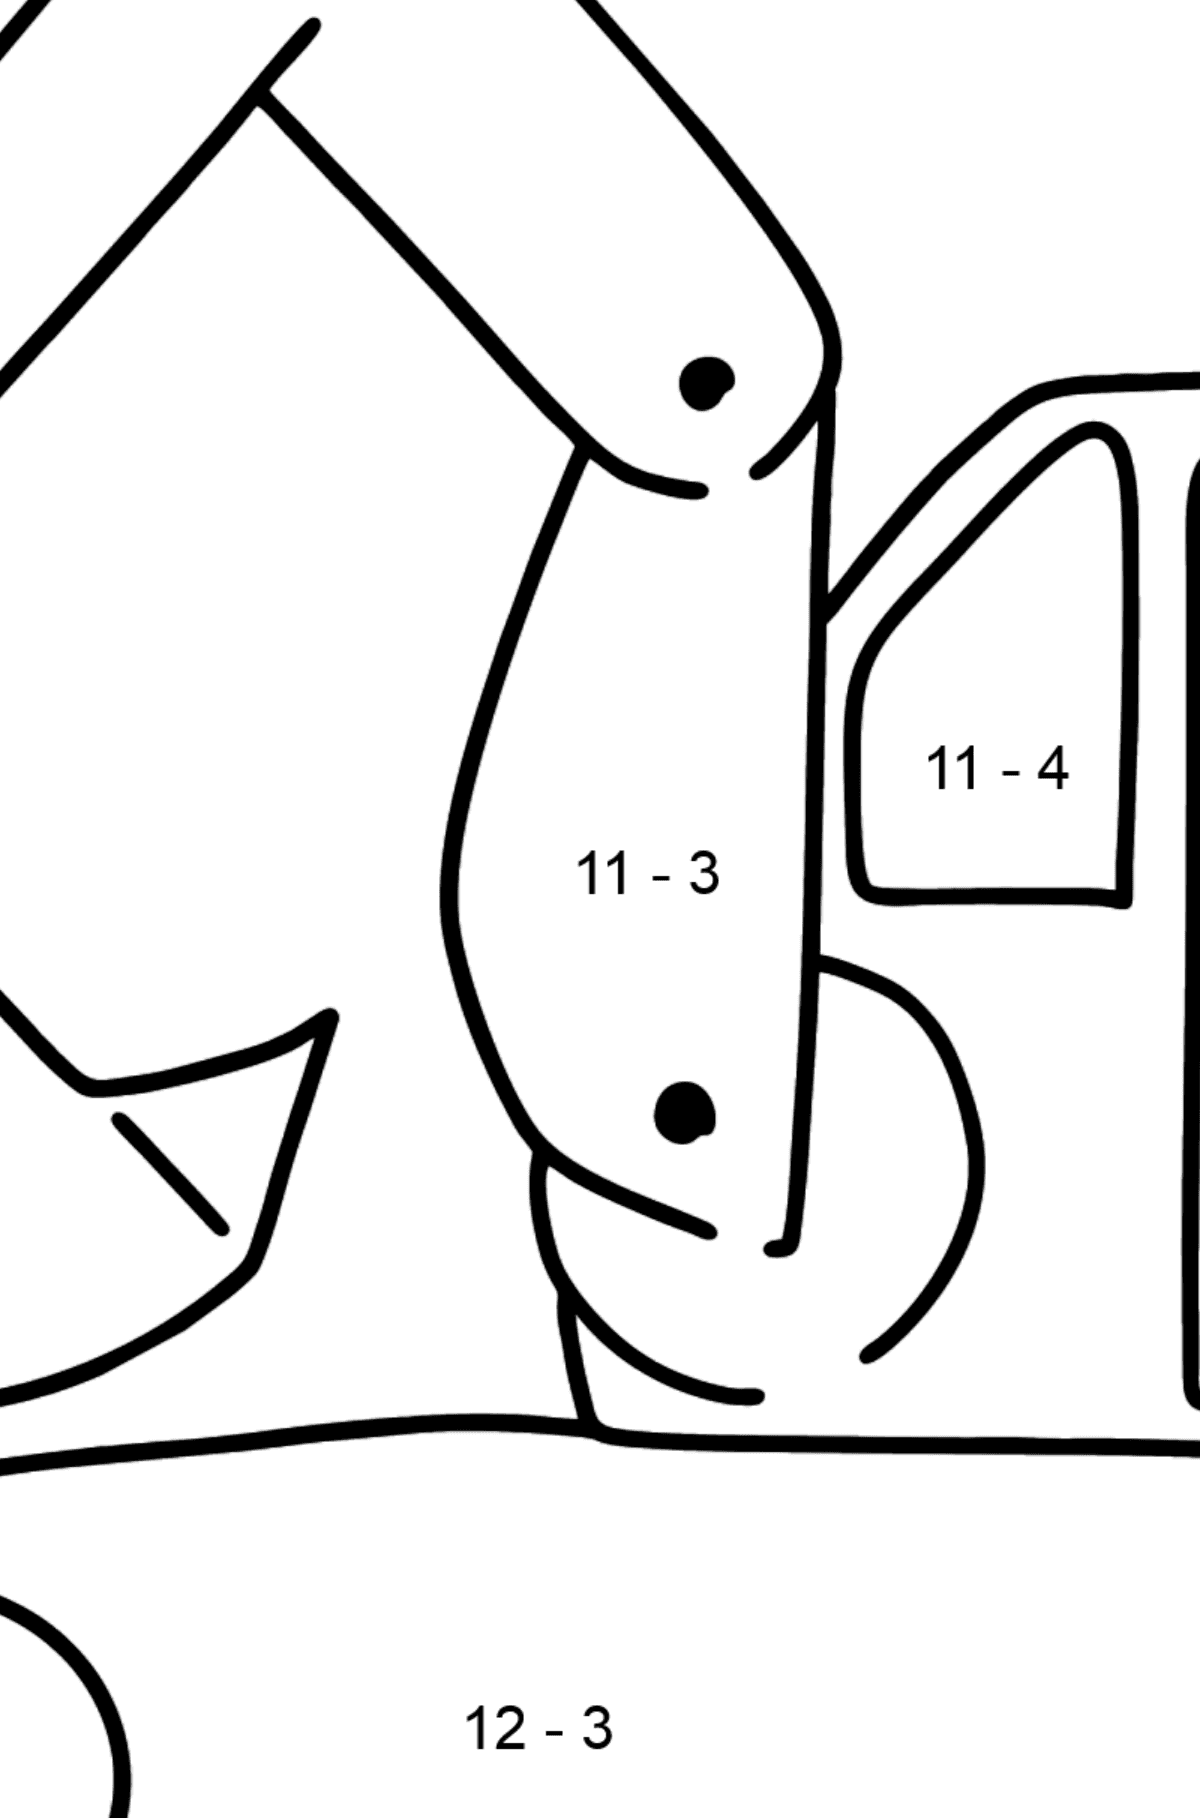 Tractor excavator coloring pages for kids - Math Coloring - Subtraction for Kids